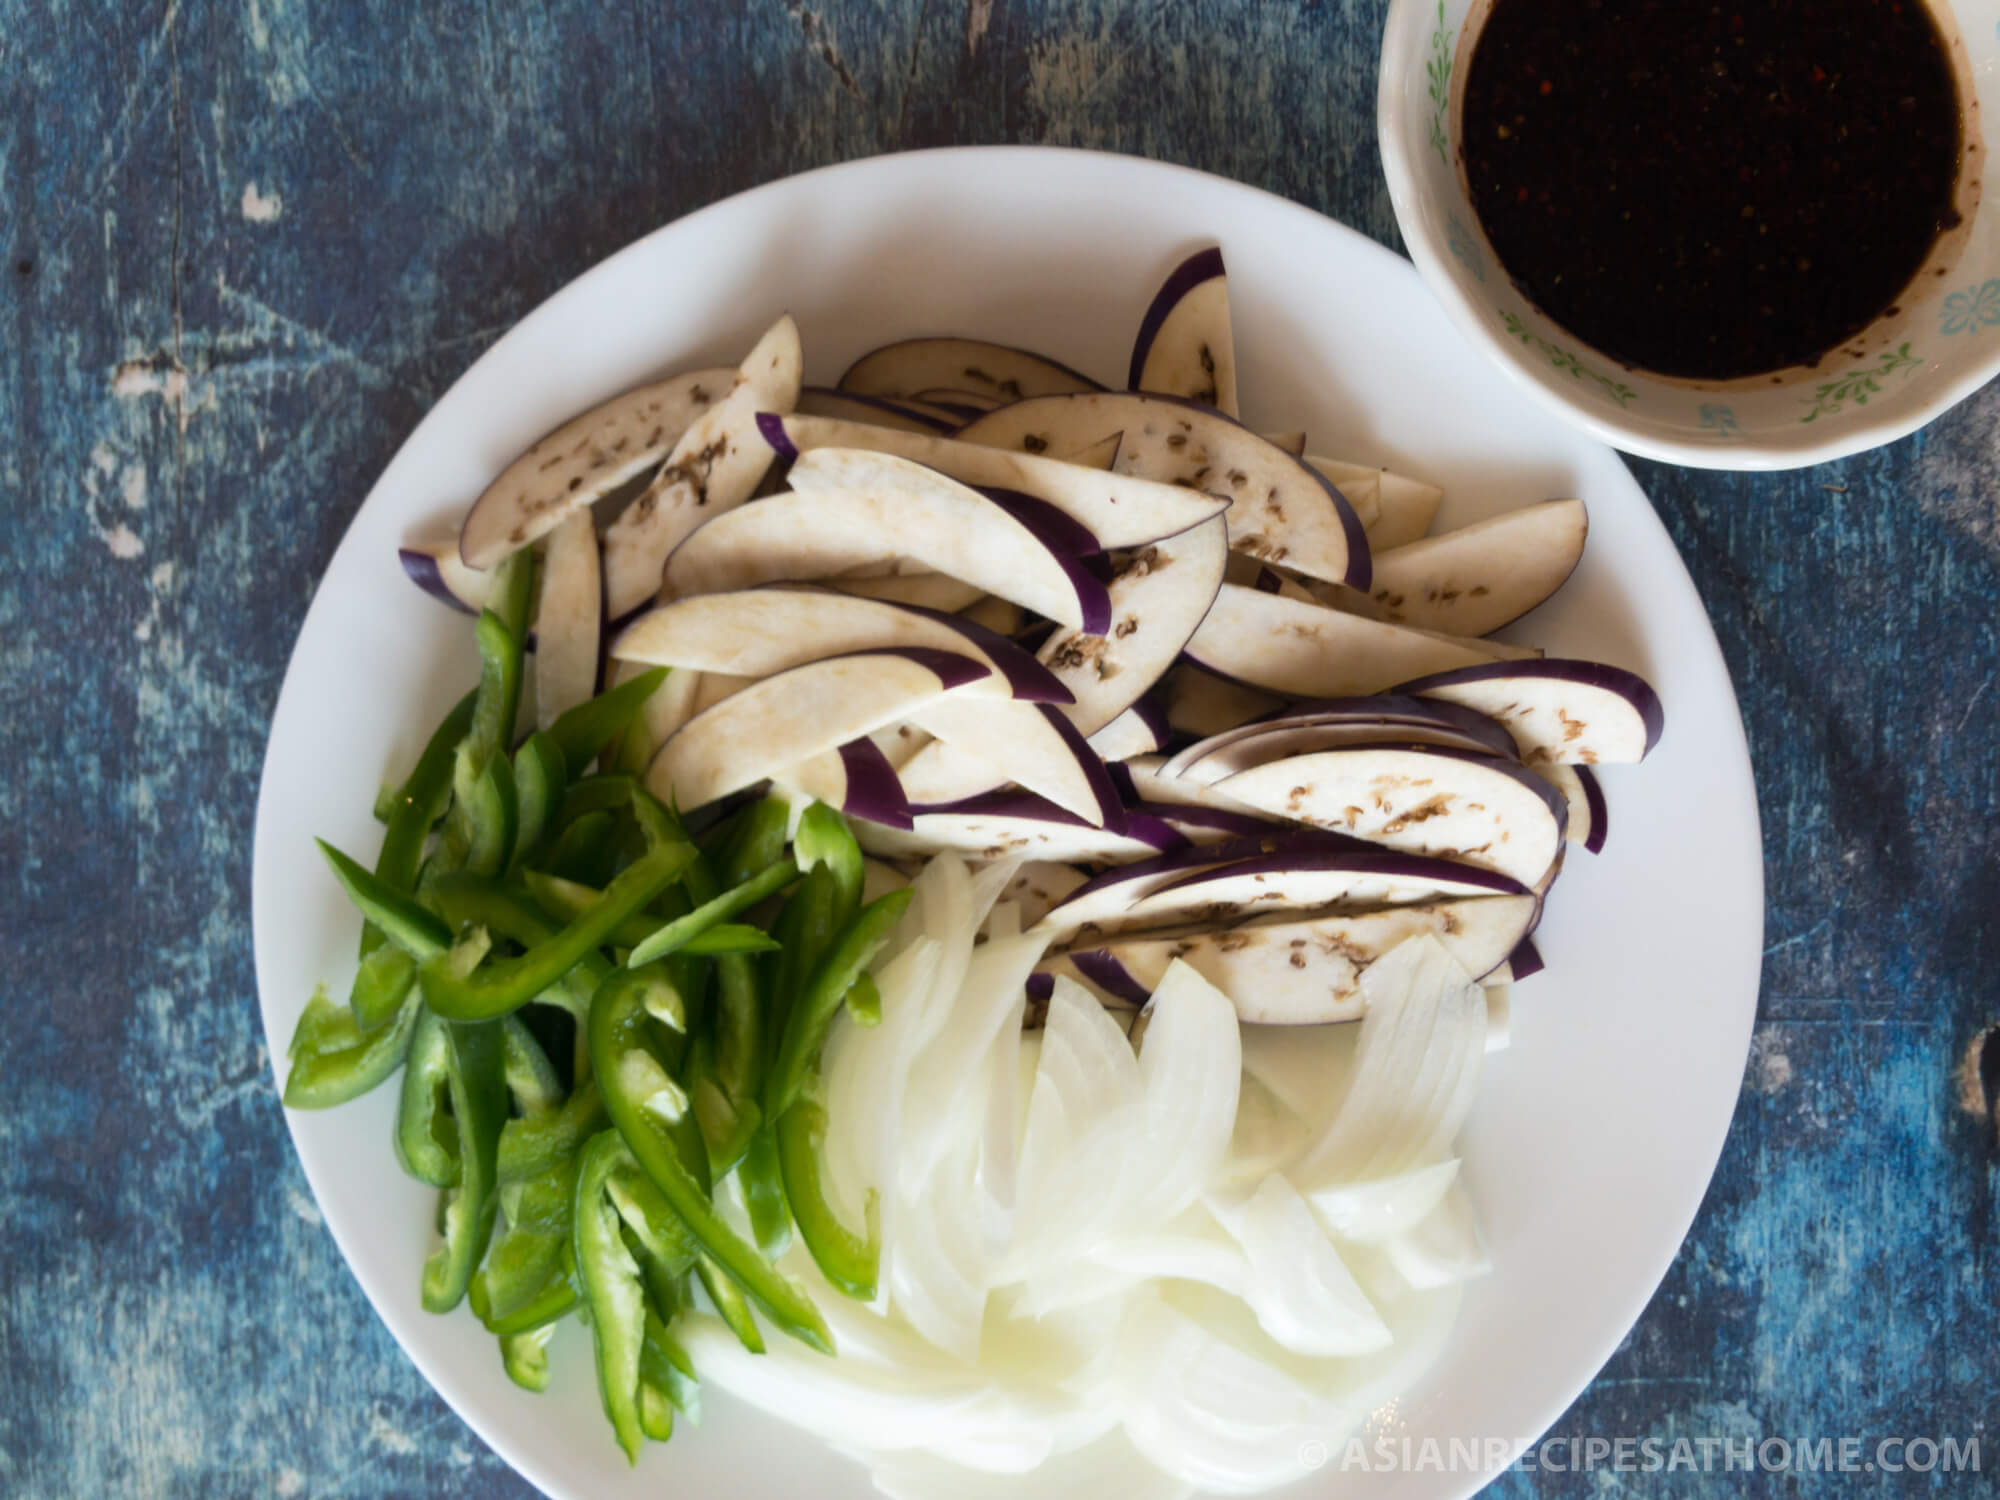 Make our Korean spicy stir-fried eggplant side dish recipe to go with your next meal. This side dish (banchan) is spicy, healthy, and a new spin on how you can prepare eggplants.